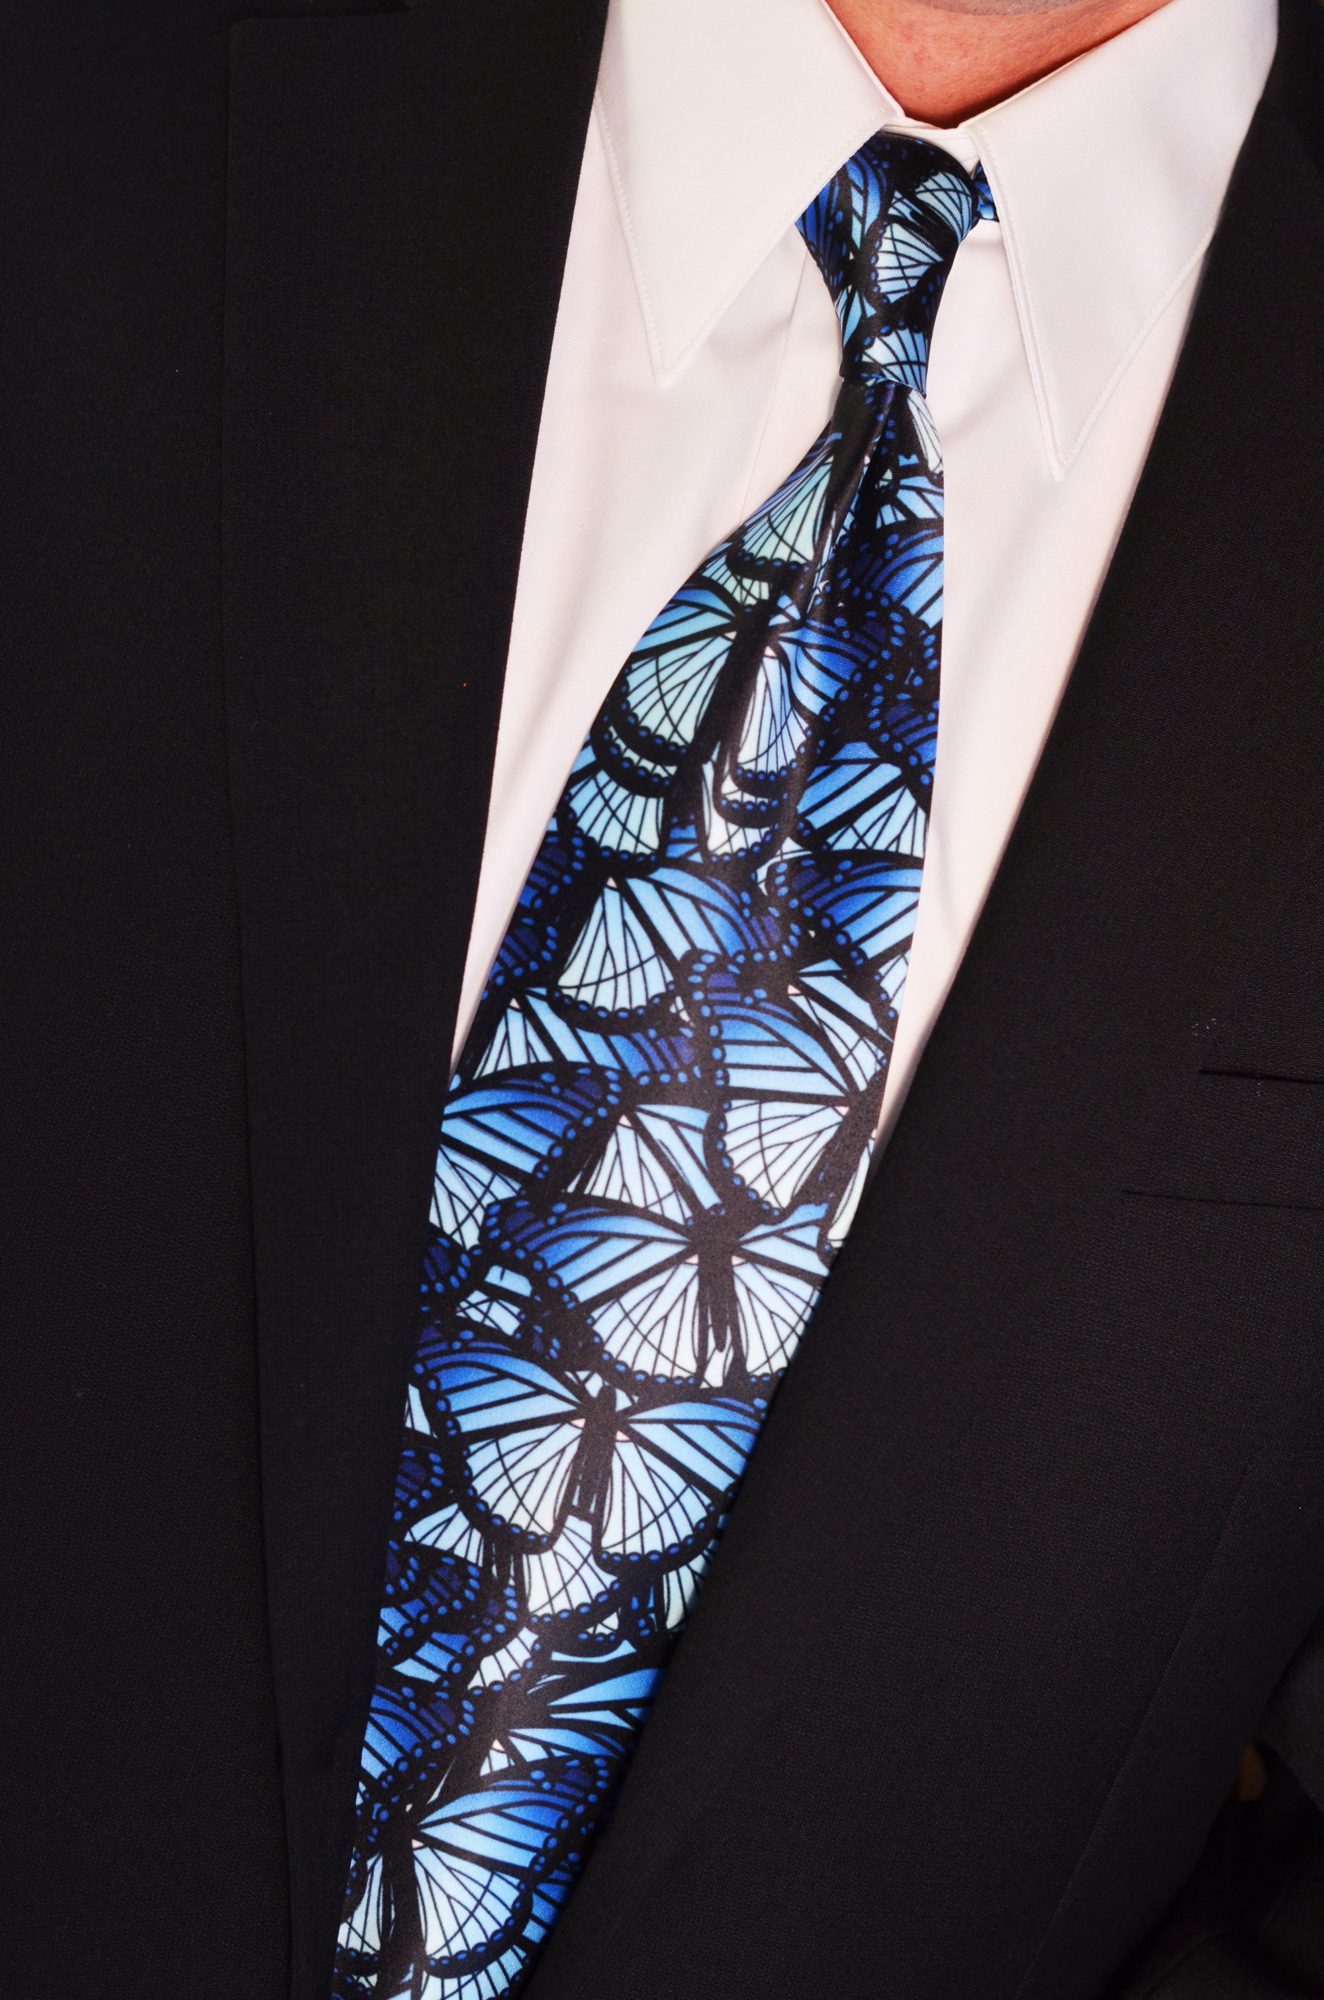 Ken Miller's tie (borrowed from CPC Executive Director, Doug Staley) was a perfect match for the Blue Ties and Butterflies event on Wednesday, April 13, at Michael's On East. Photo by Heather Merriman Saba